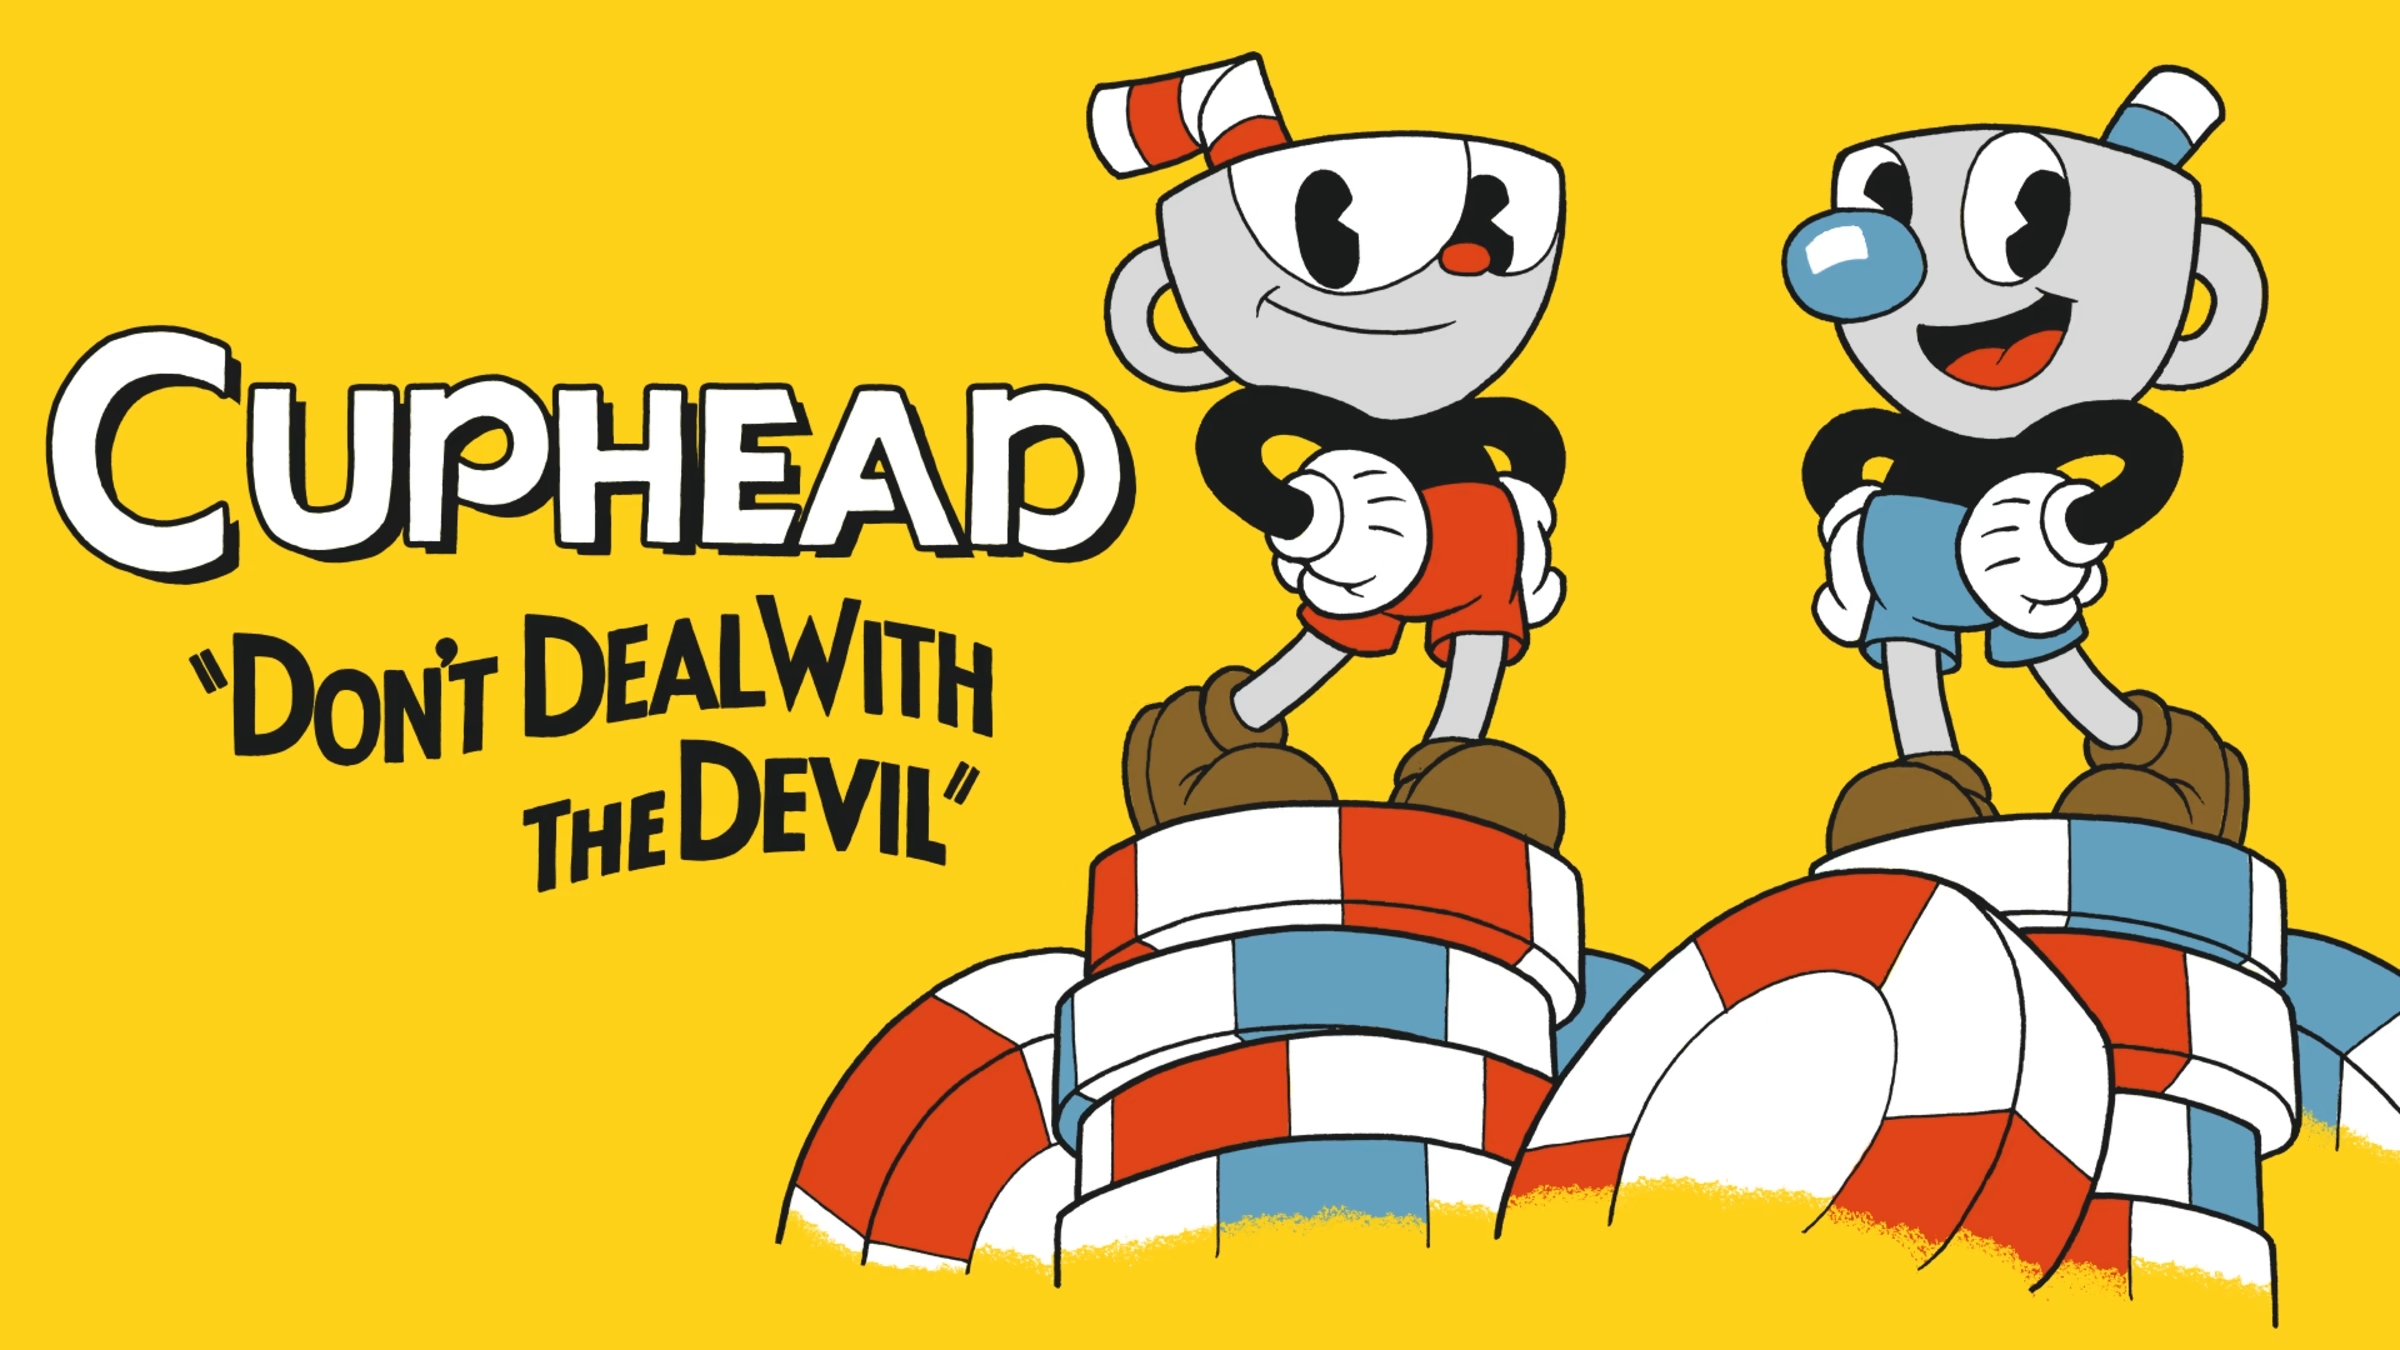 Cuphead cover